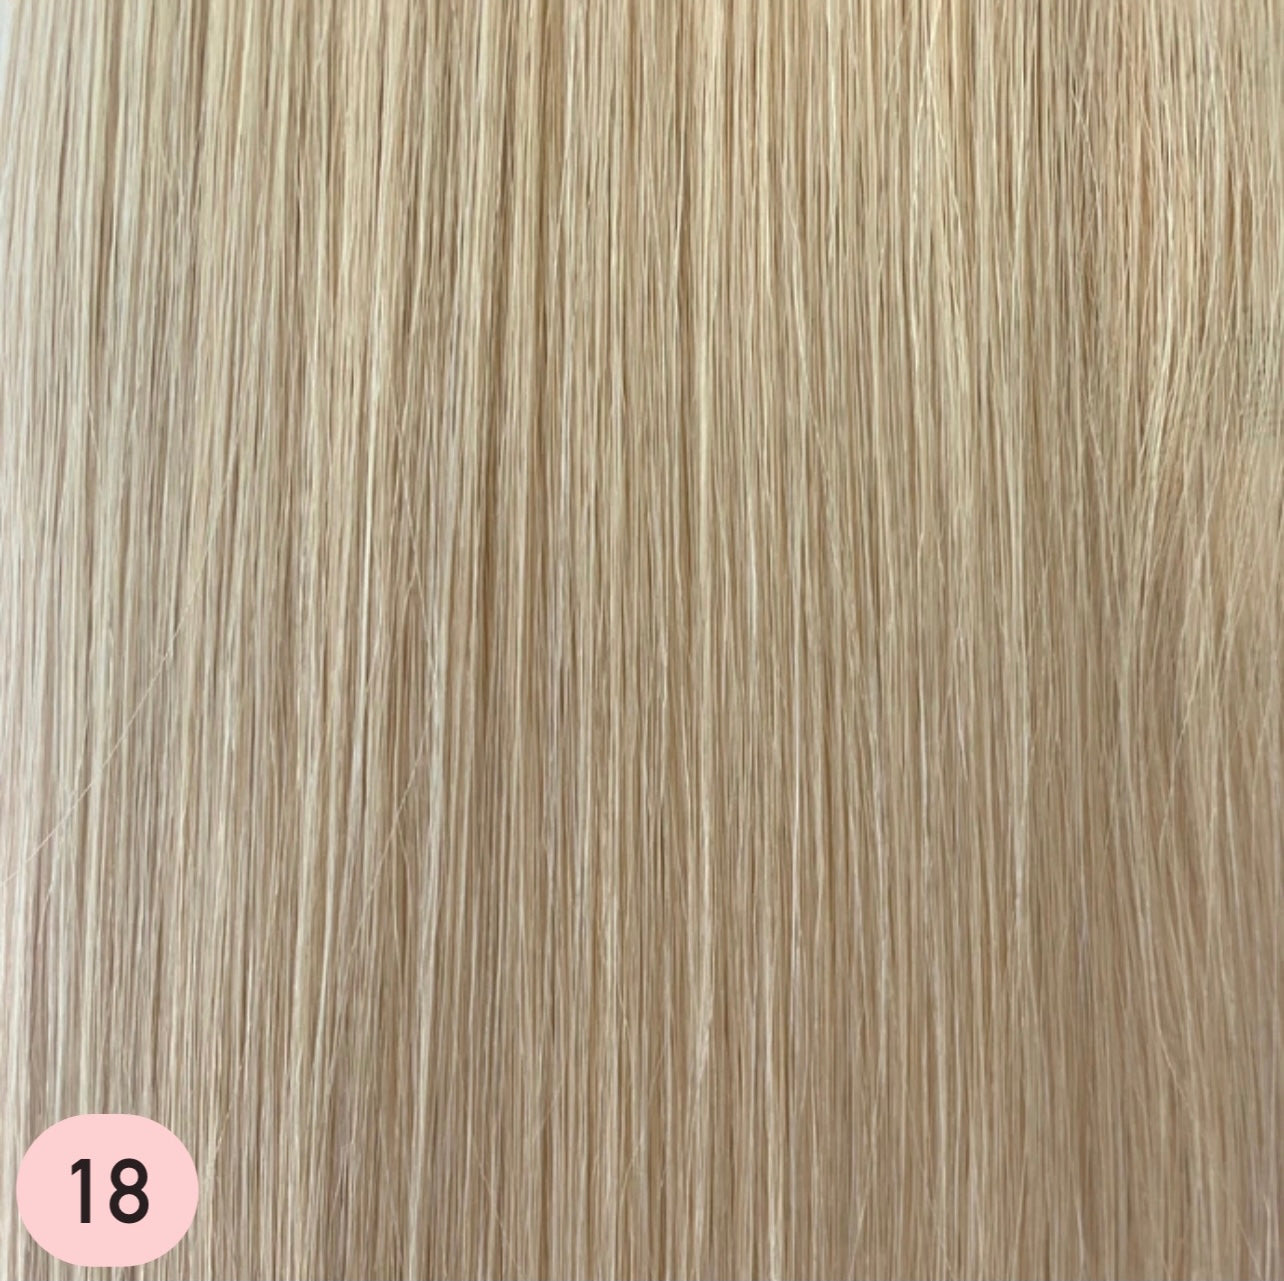 24" SANDY BLONDE Russian Hair Tape Extensions 20pc